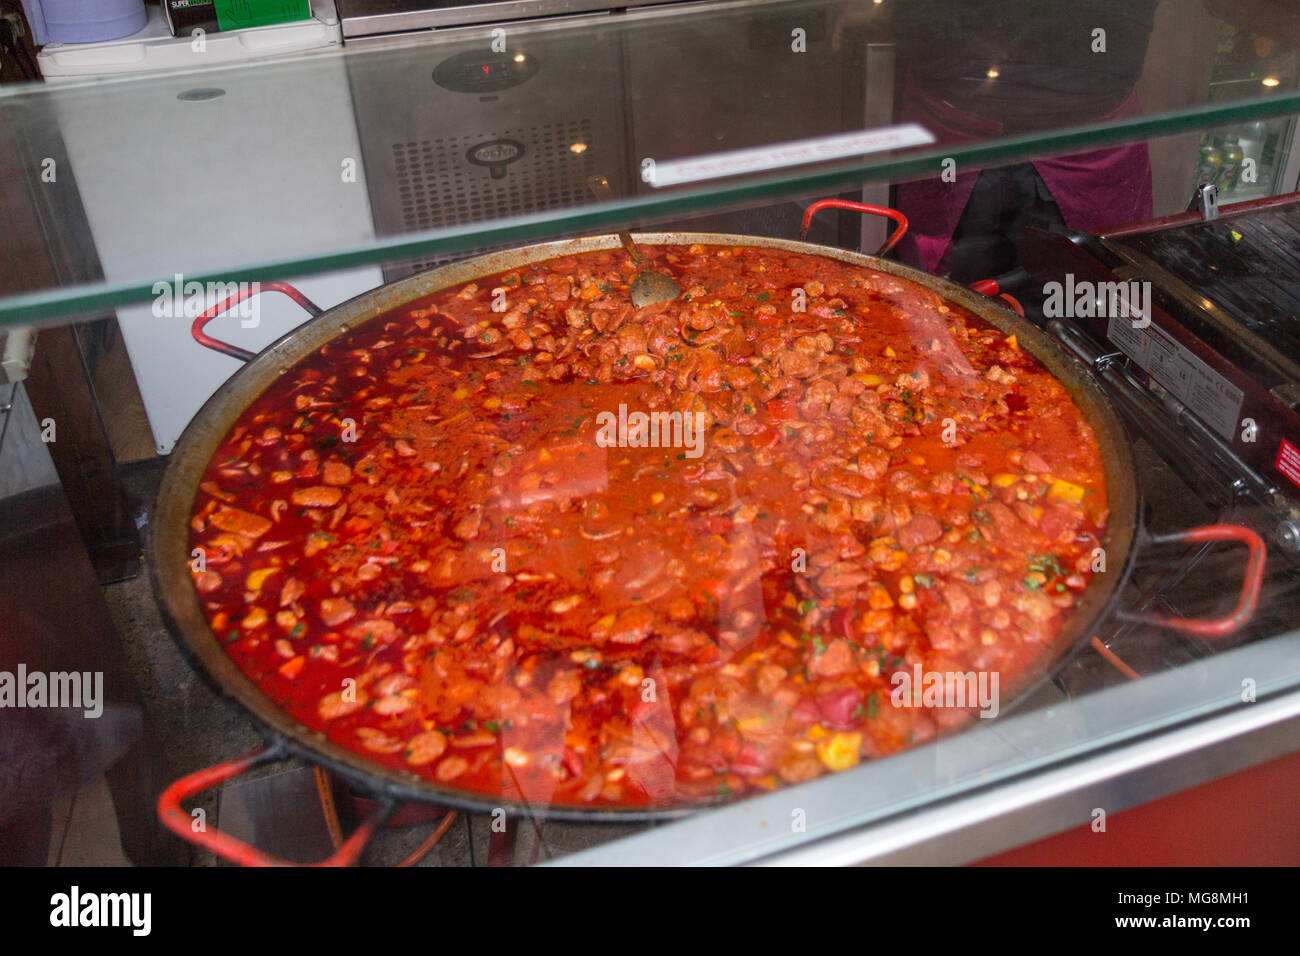 London, United Kingdom - May 2, 2015: An urn of hot food waiting to be served on a street vendor's stall in Borough Market. Stock Photo